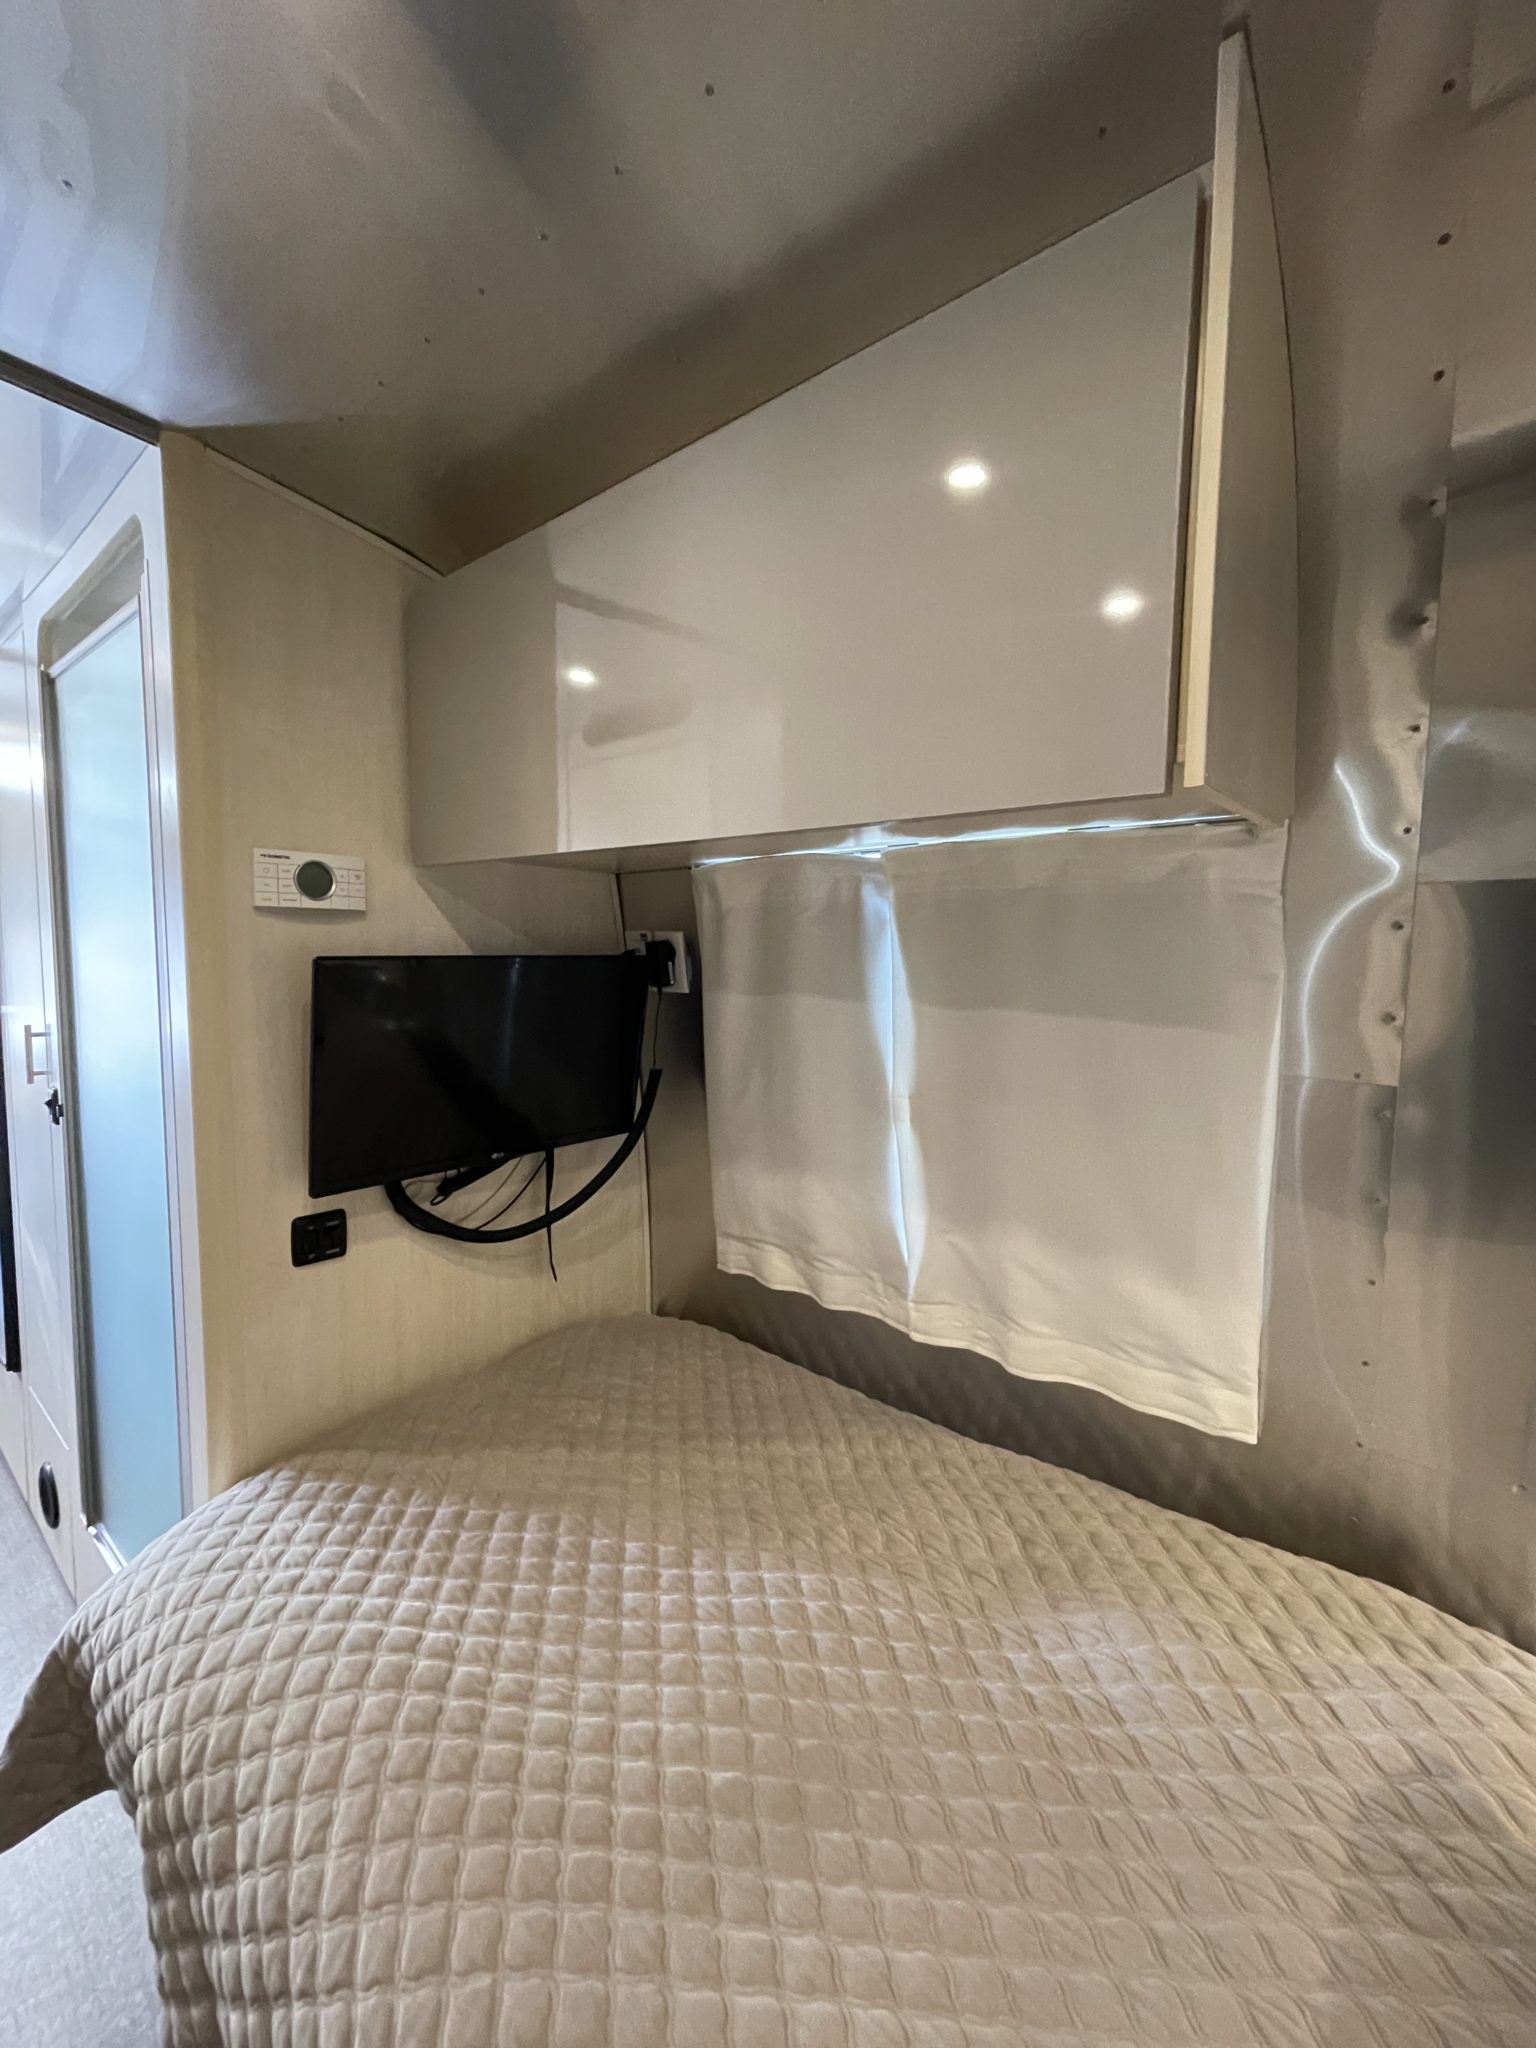 2021 25FT Flying Cloud For Sale in Fair Oaks - Airstream Marketplace